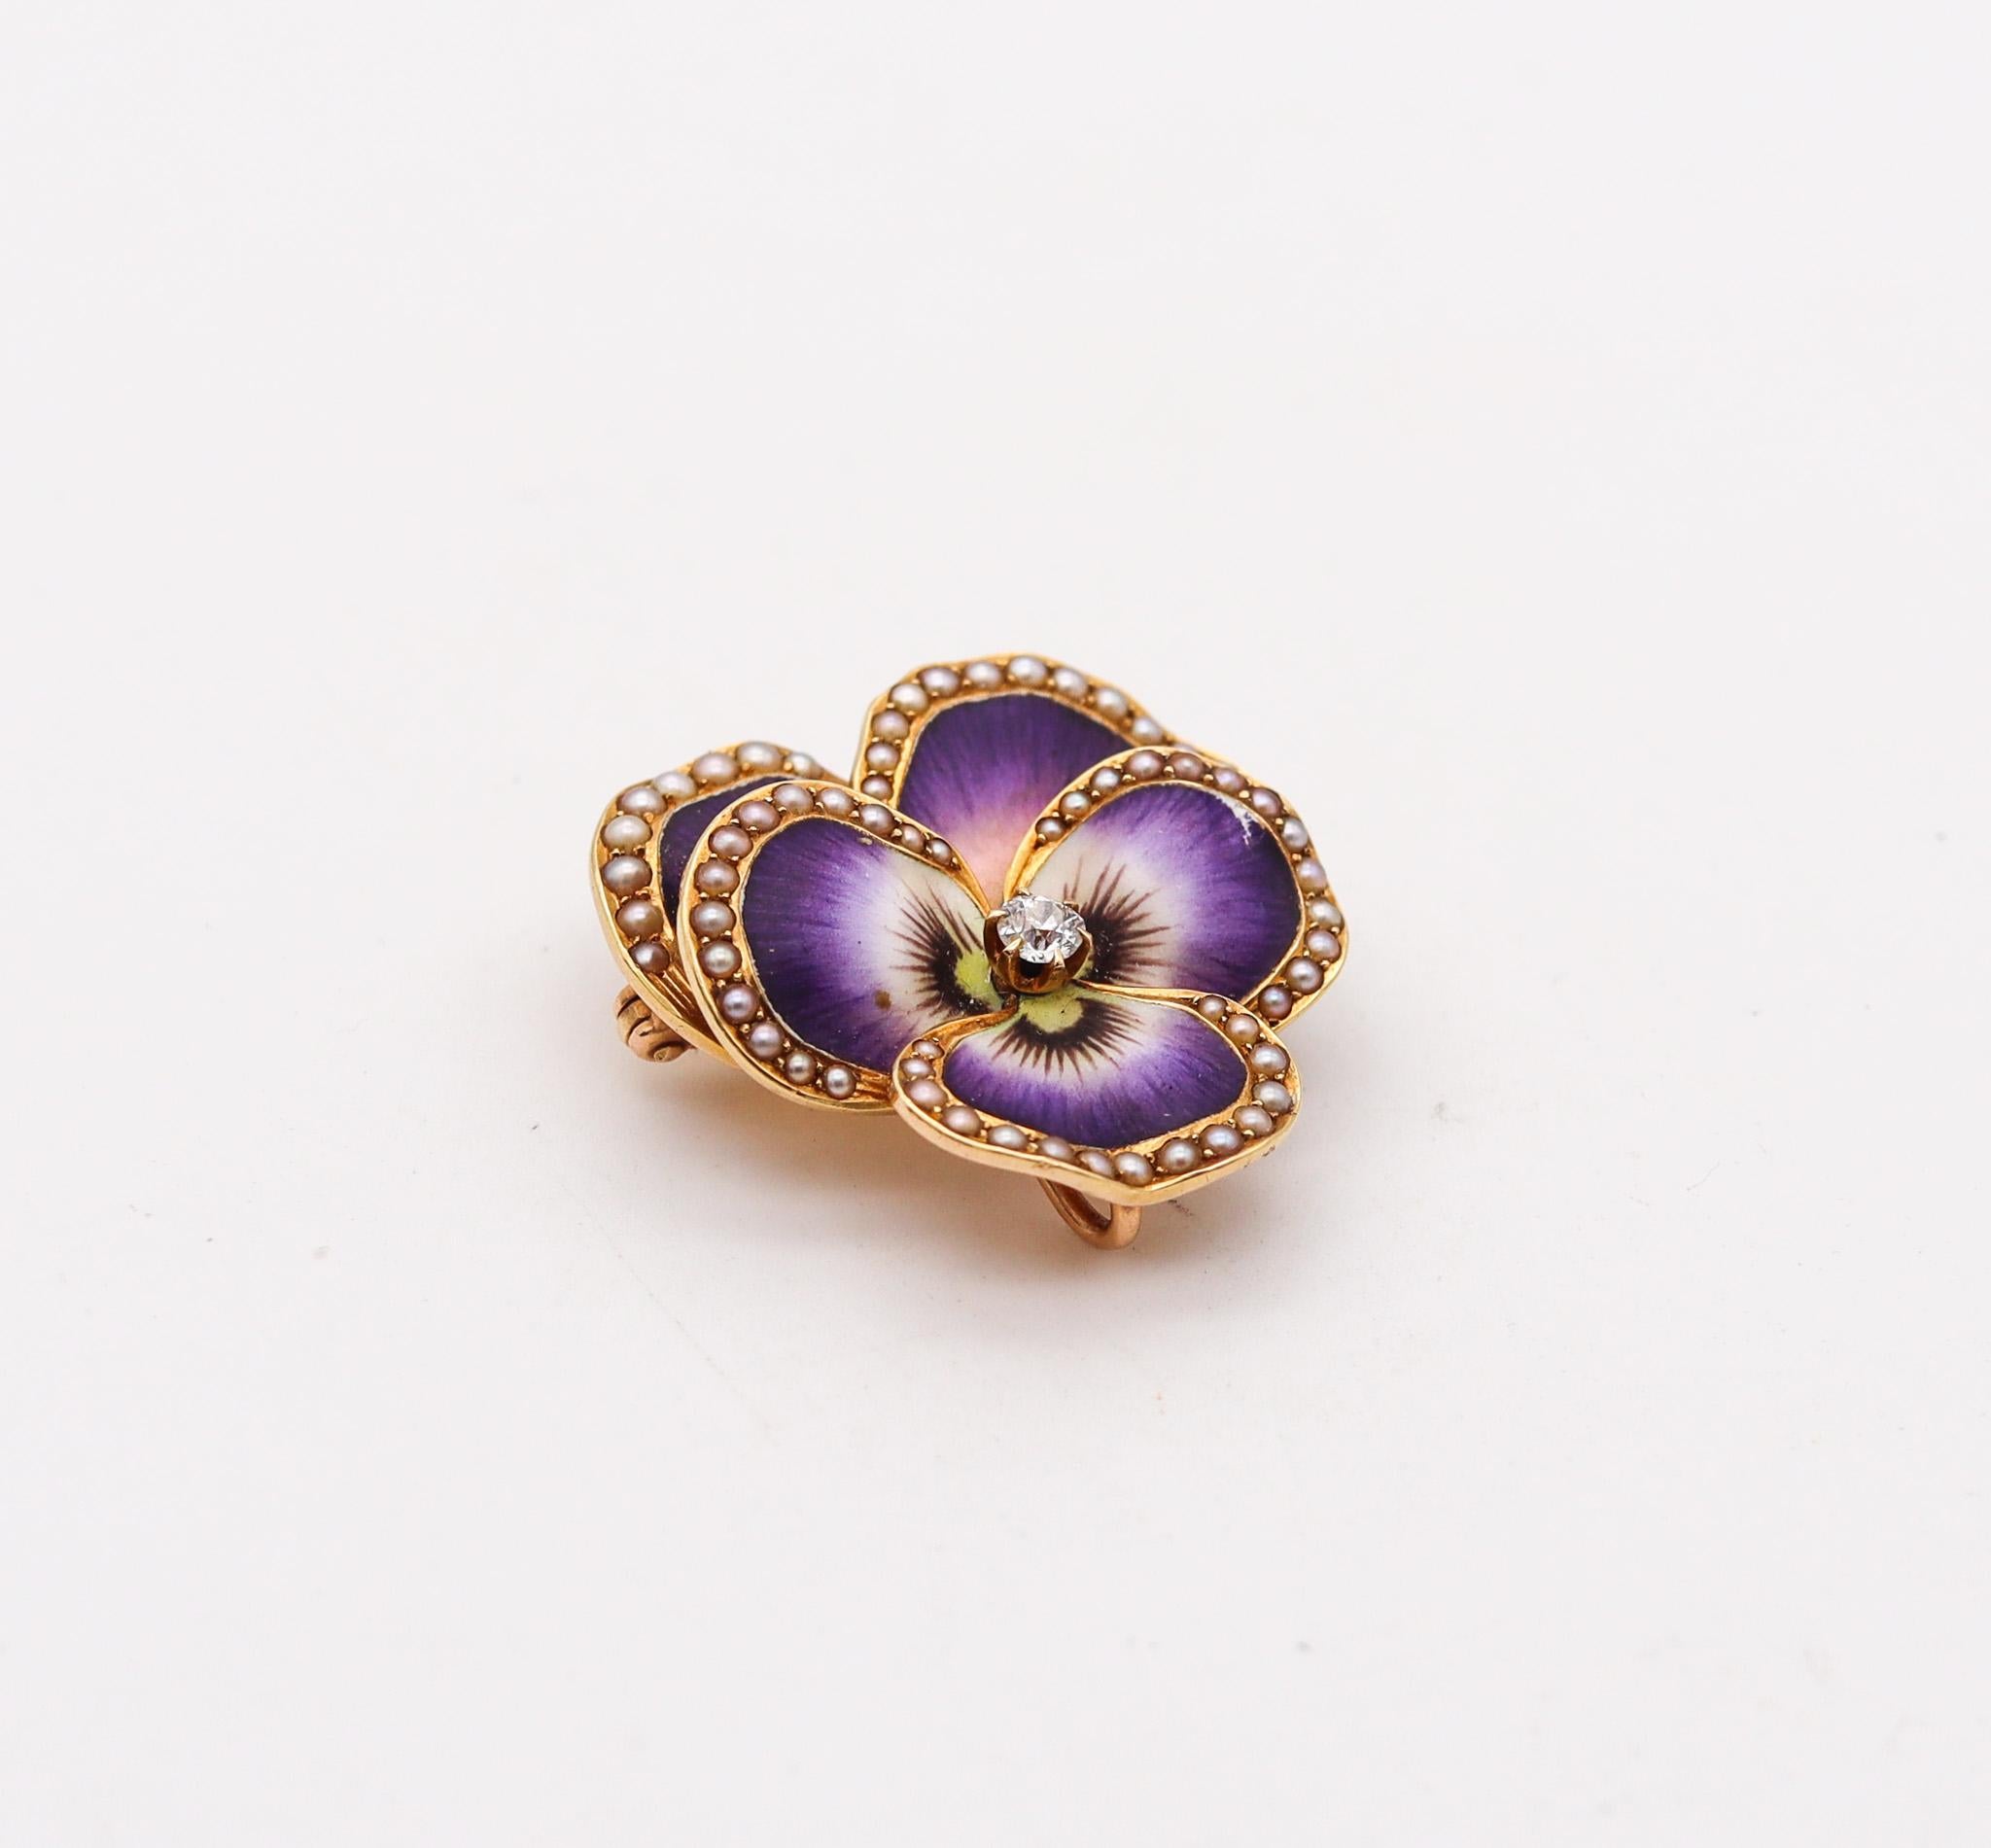 Edwardian Pansy flower convertible brooch designed by Crane & Theurer Inc.

An exceptional piece, created in America during the Edwardian and the Art Nouveau periods, back in the 1900's. This outstanding convertible pendant-brooch has been carefully